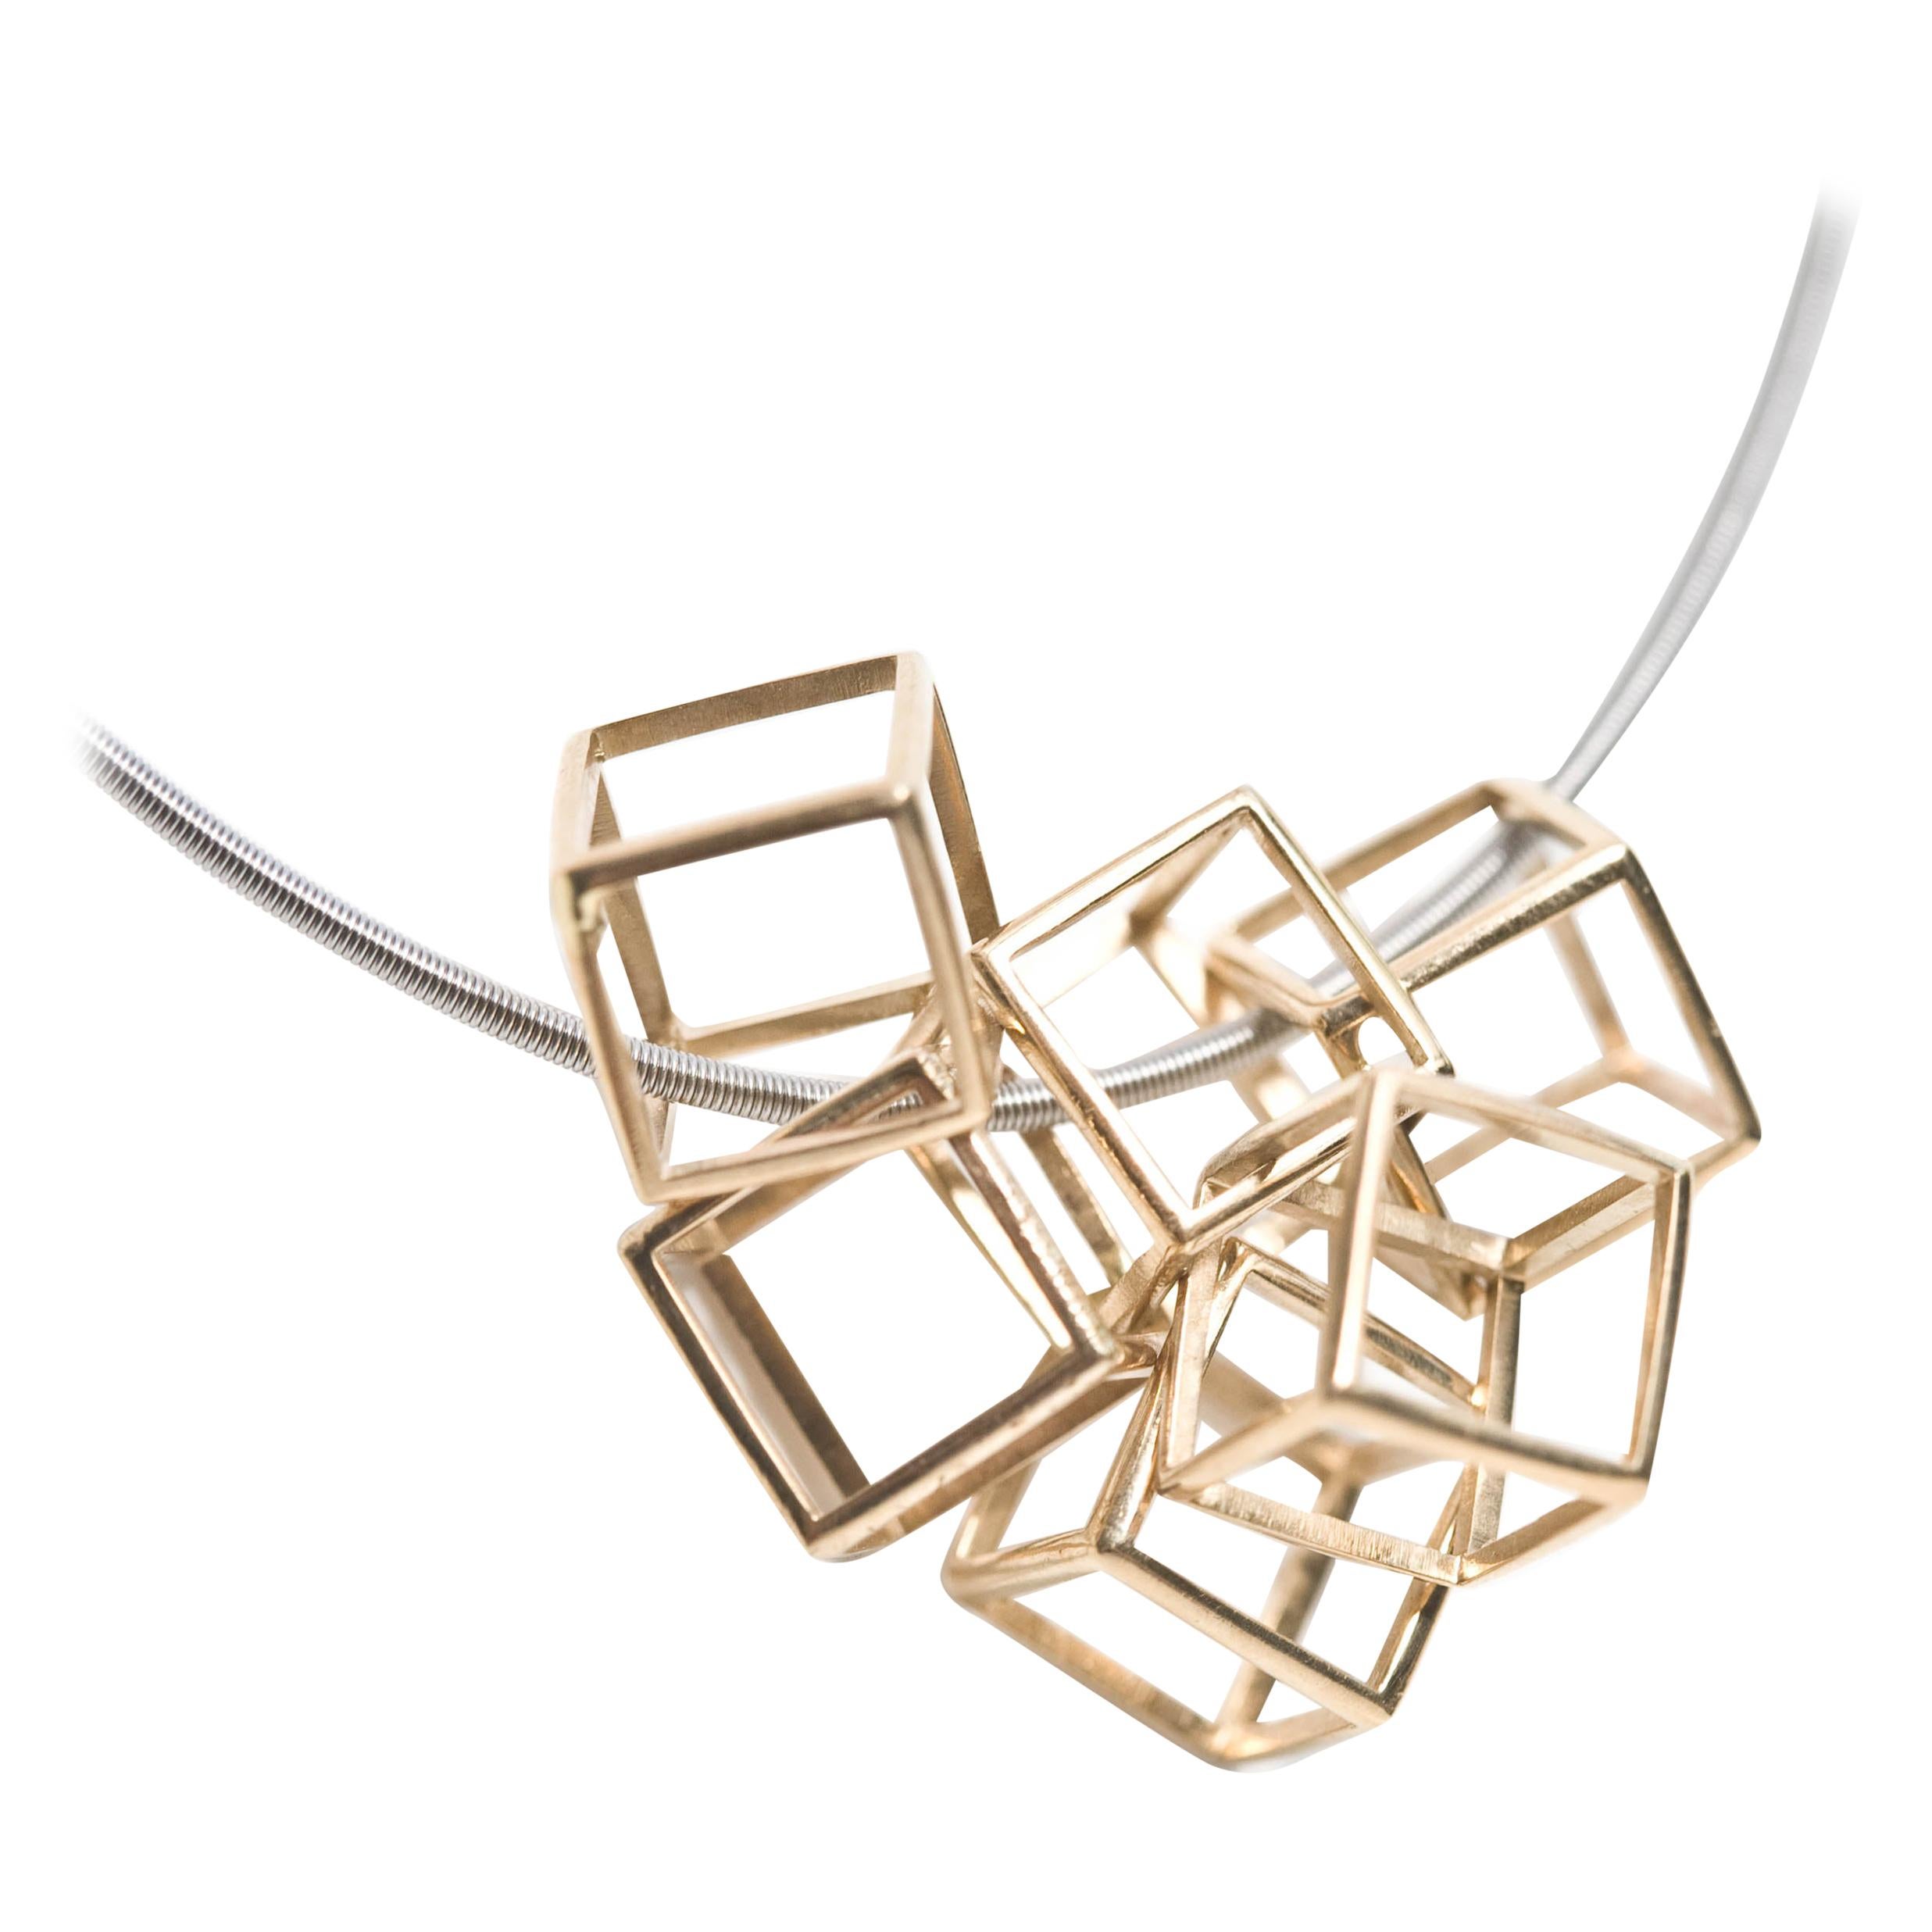  18 Karat Yellow Gold, Unique Geometric Pendant, Stainless Steel Coil. For Sale